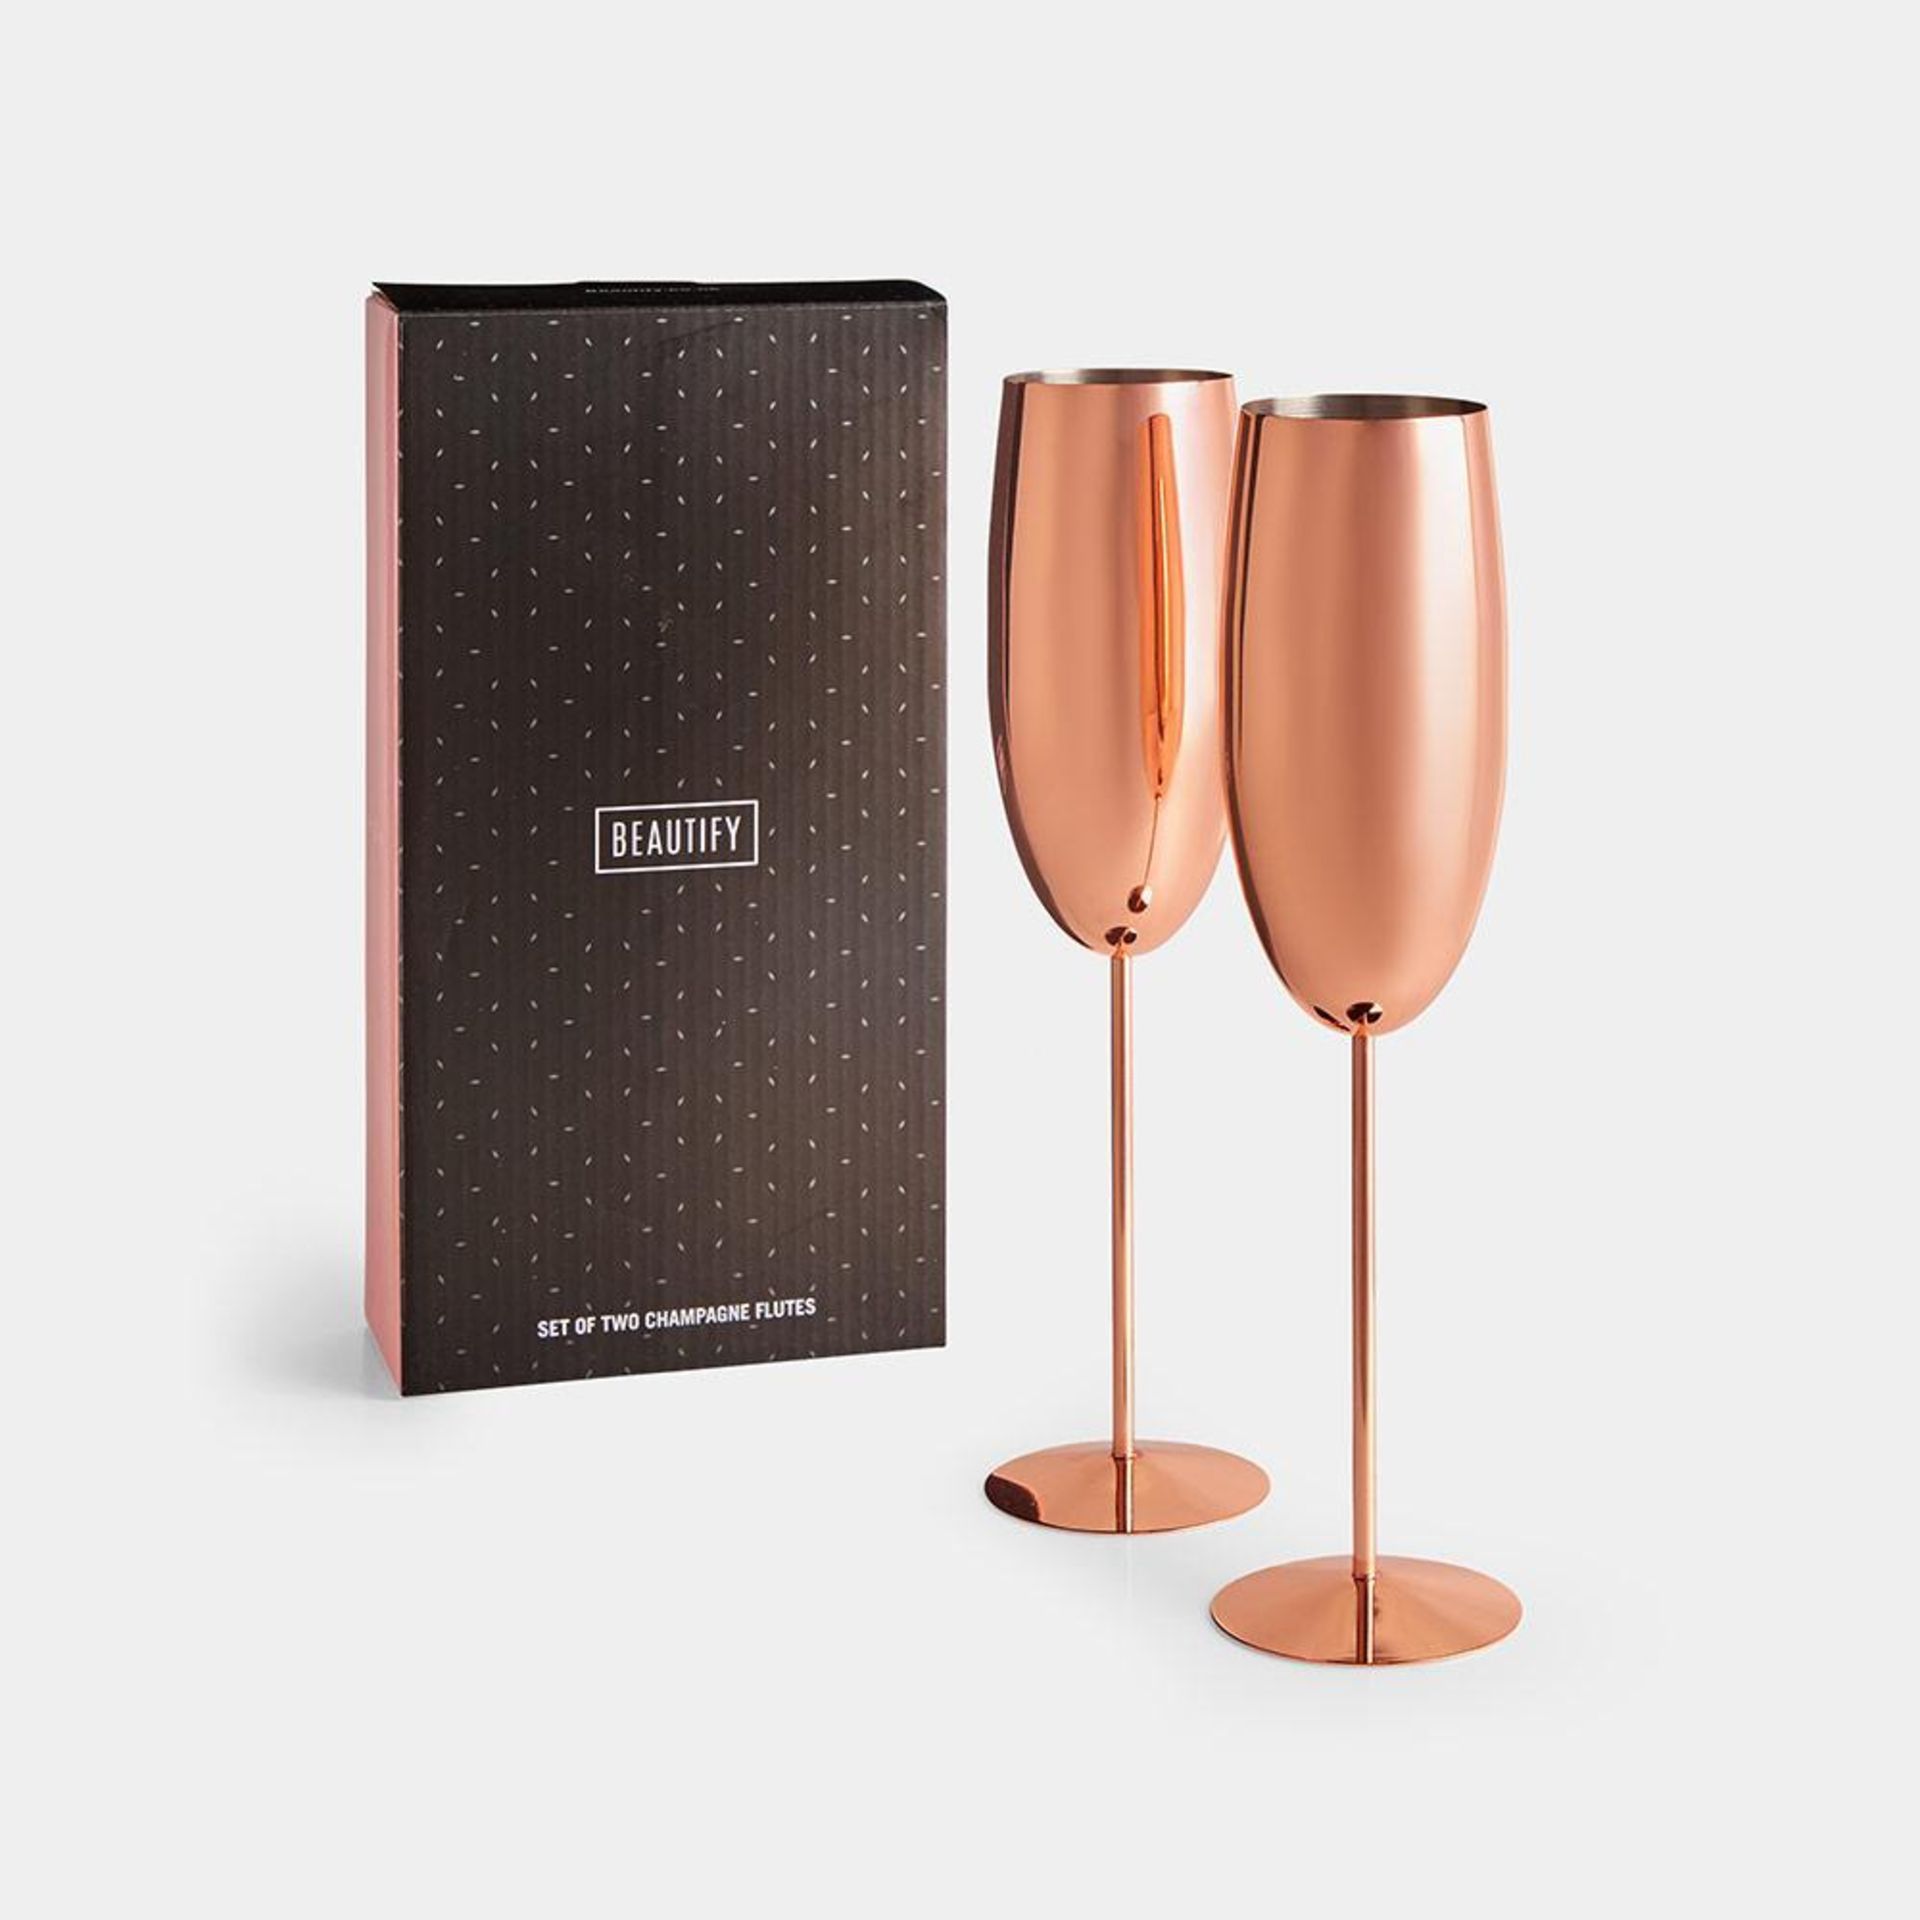 Rose Gold Champagne Flutes Make a glamorous toast with the Beautify Rose Gold Champagne Glasses.